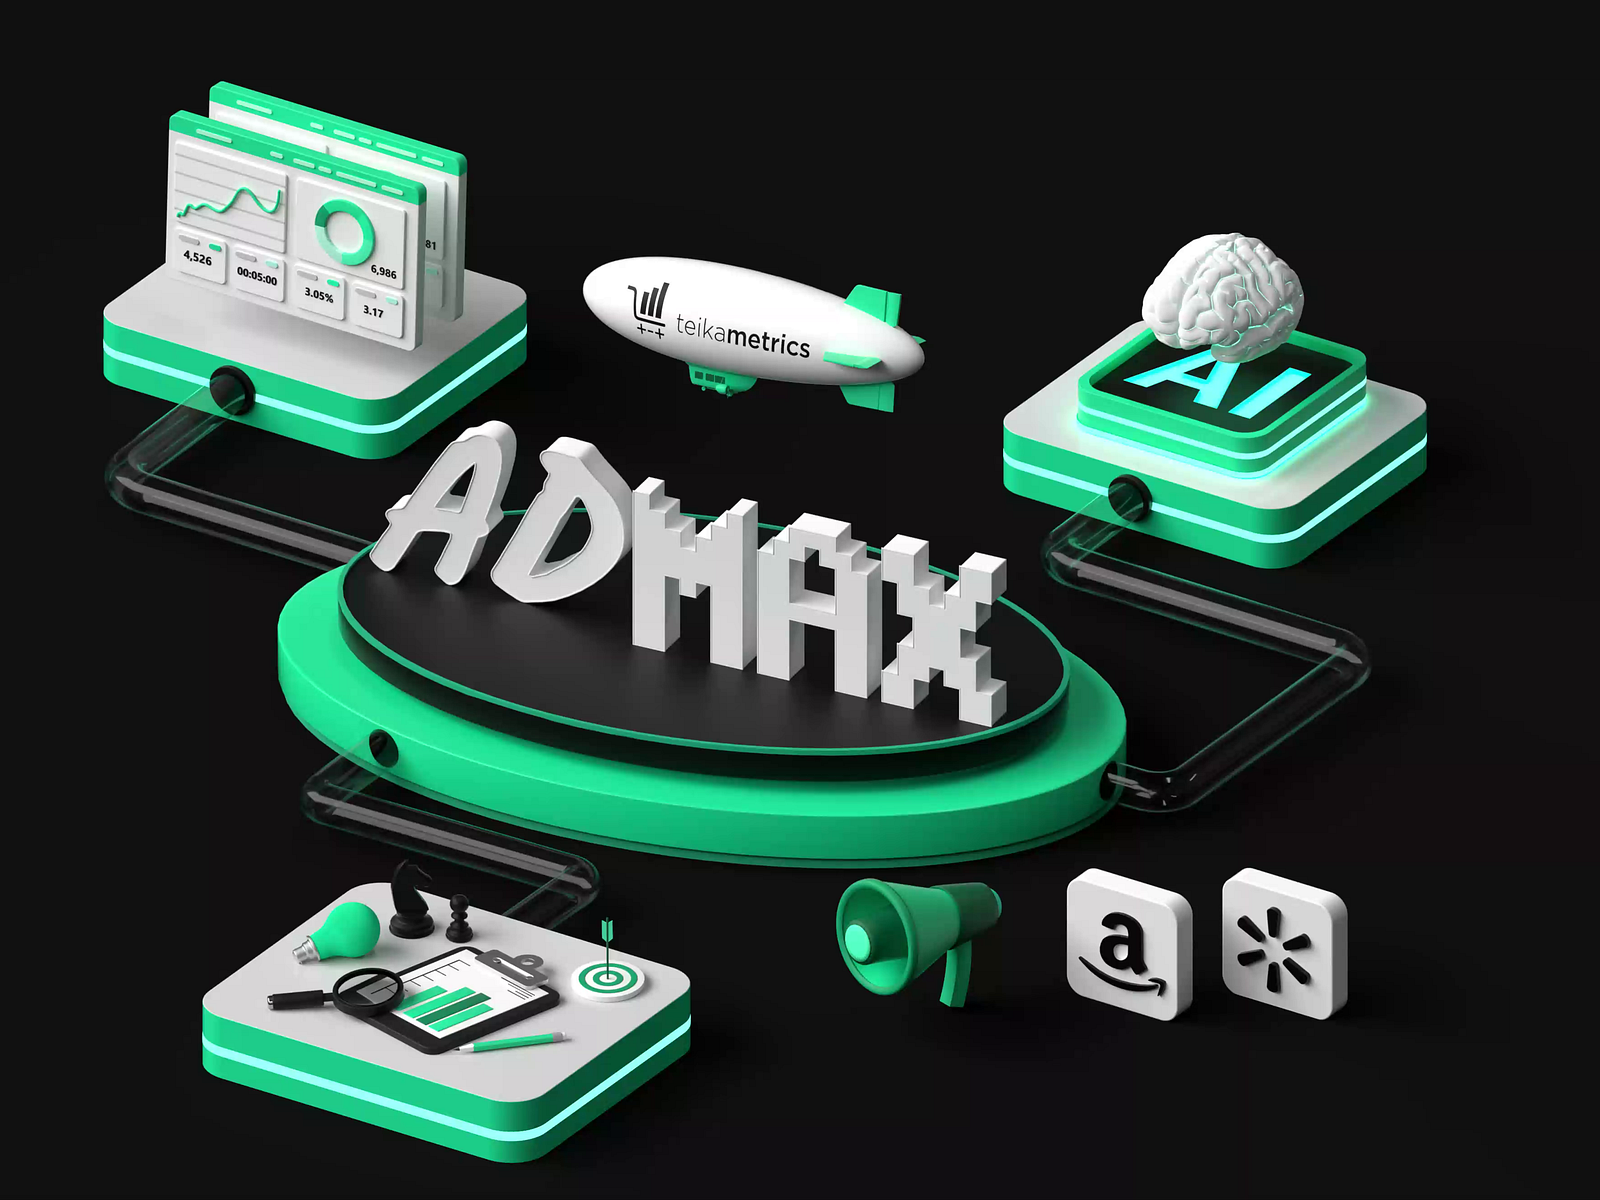 ADMAX LOGO 3D ANIMATION by Vedant Hegde on Dribbble